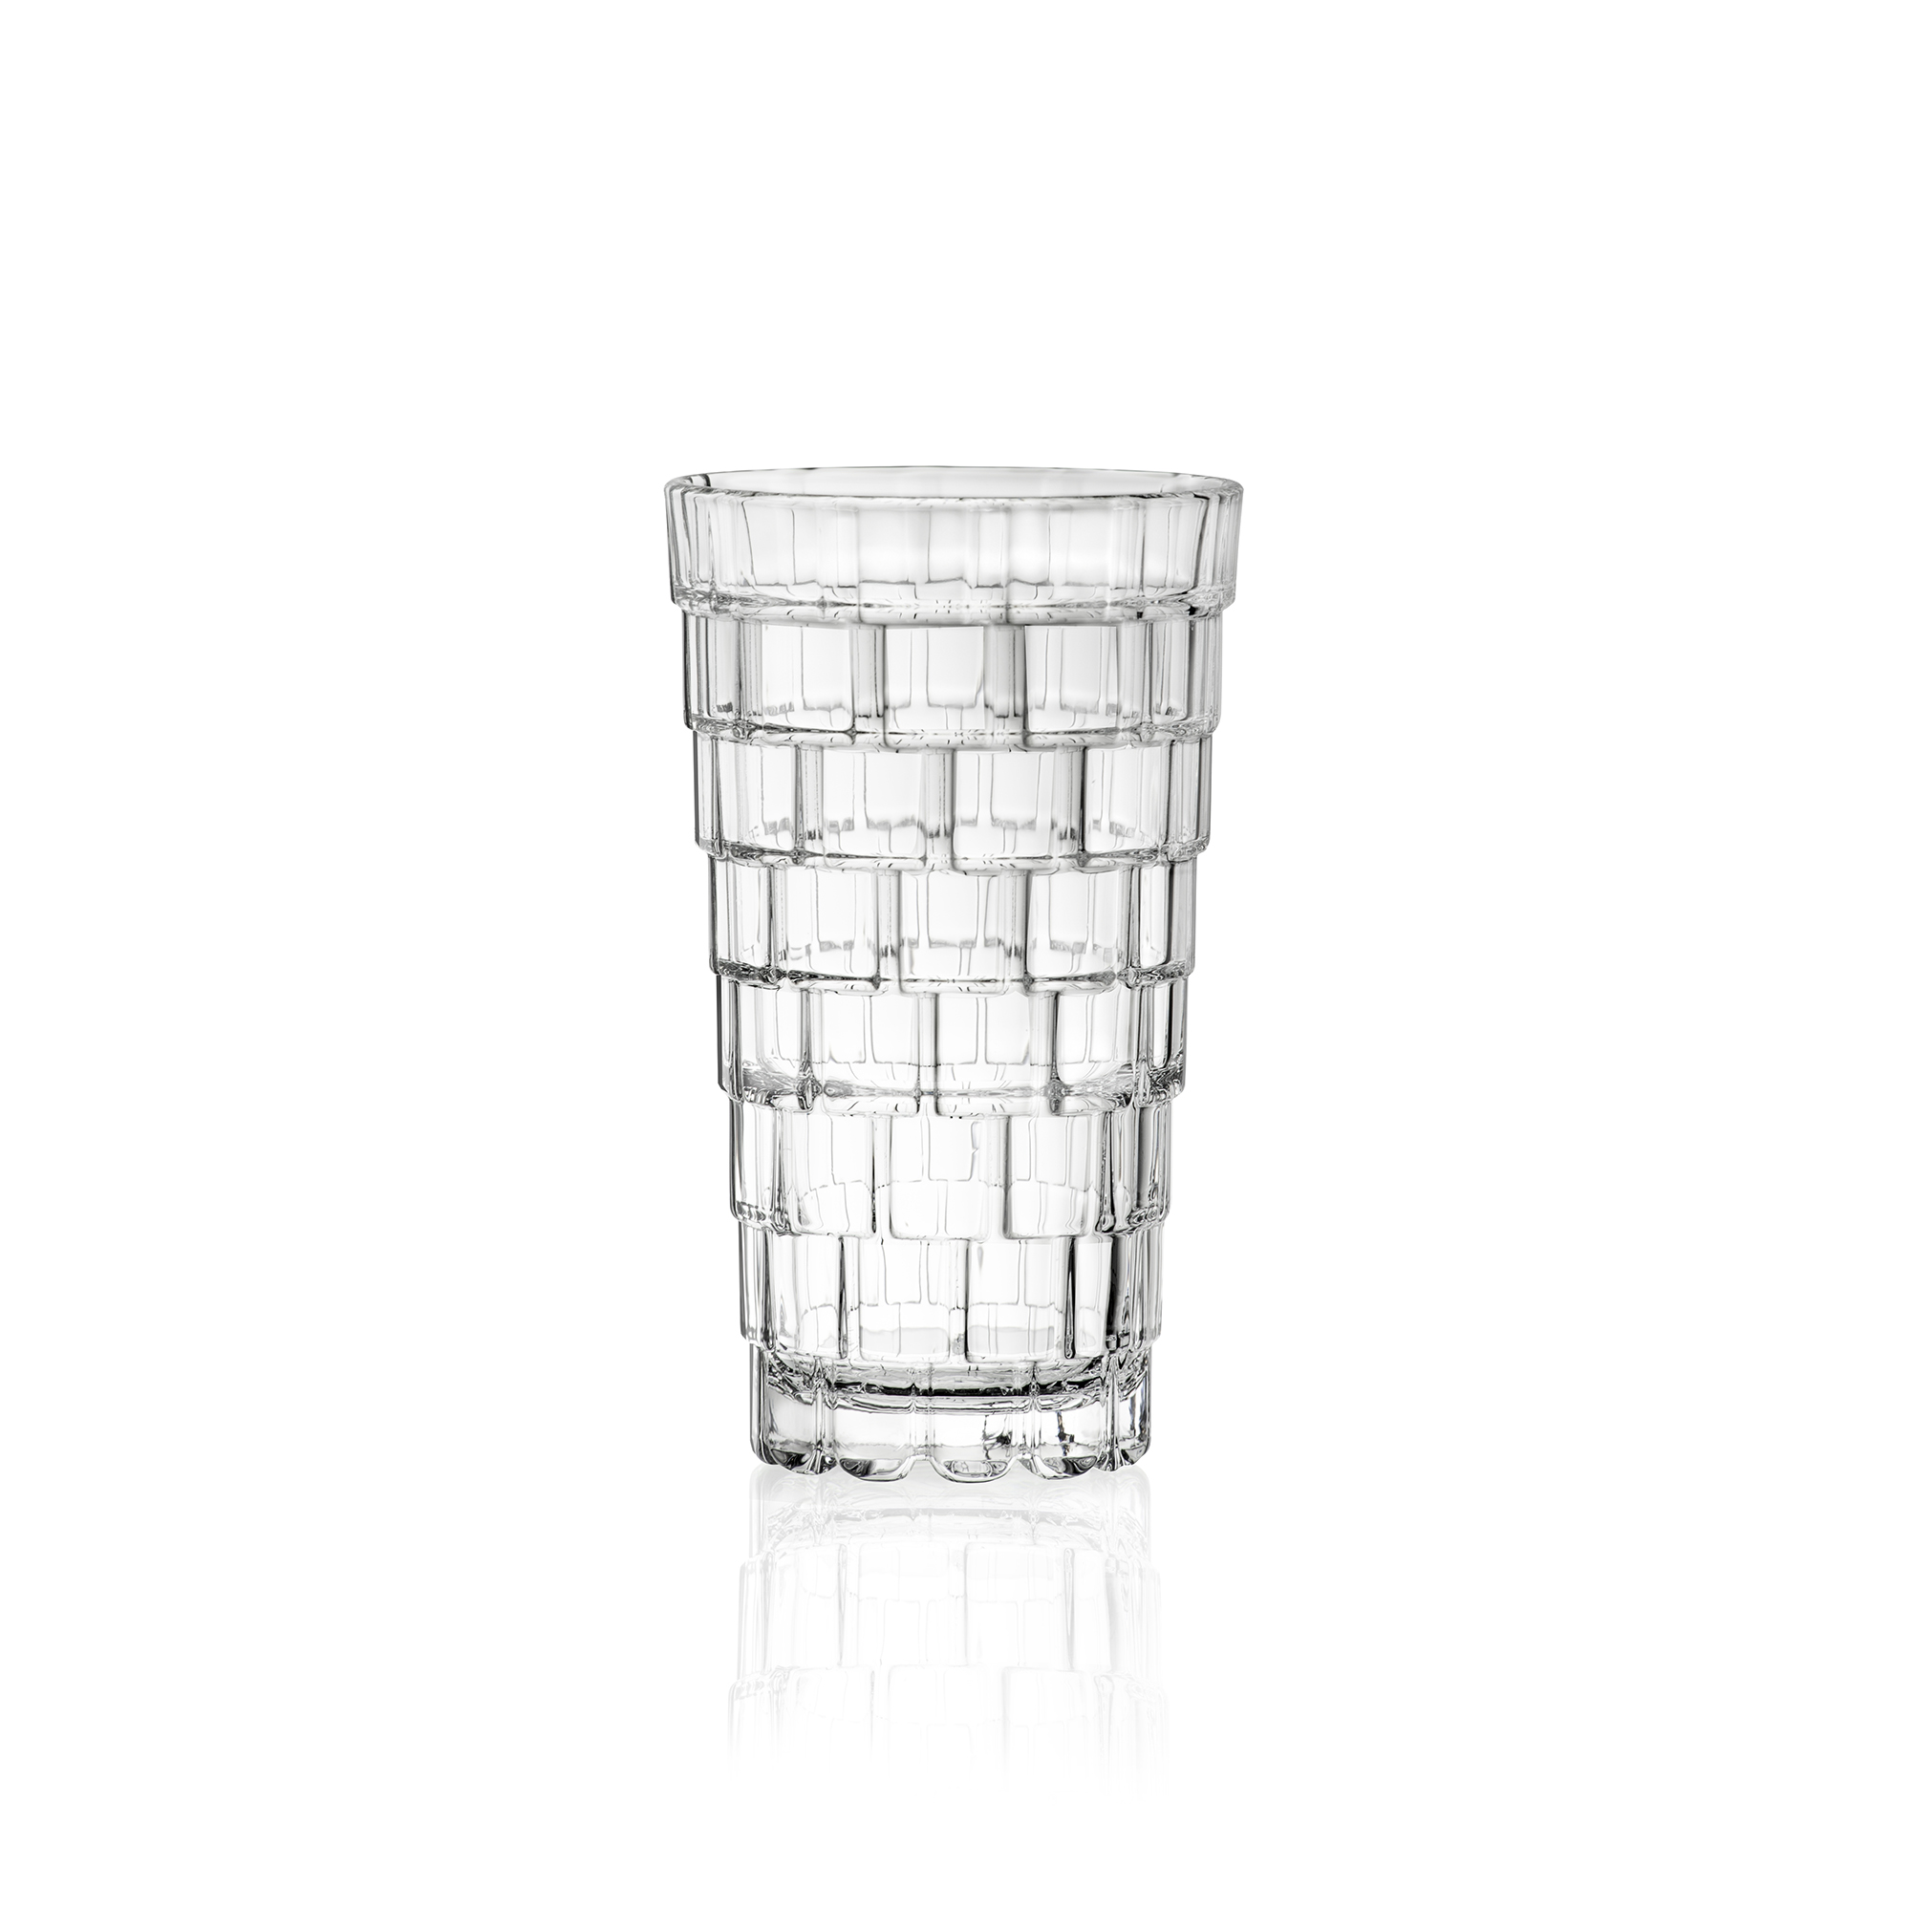 STACK DOF GLASS 390ml LUXION PROFESSIONAL RCR ITALY